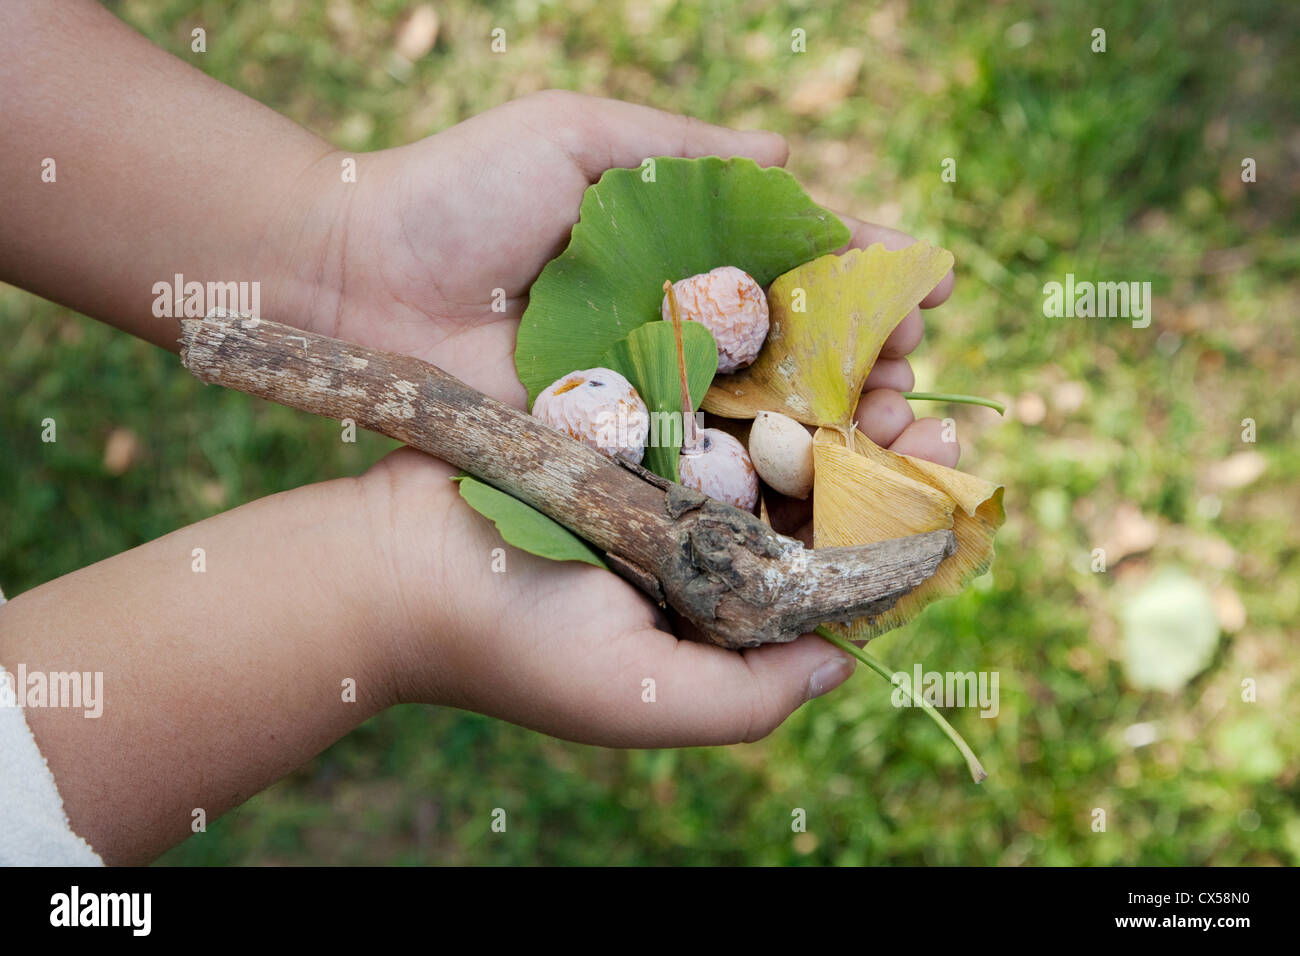 In the hands of a child branches,fruits, seeds, the leaves and bark of tree Ginkgo biloba Stock Photo